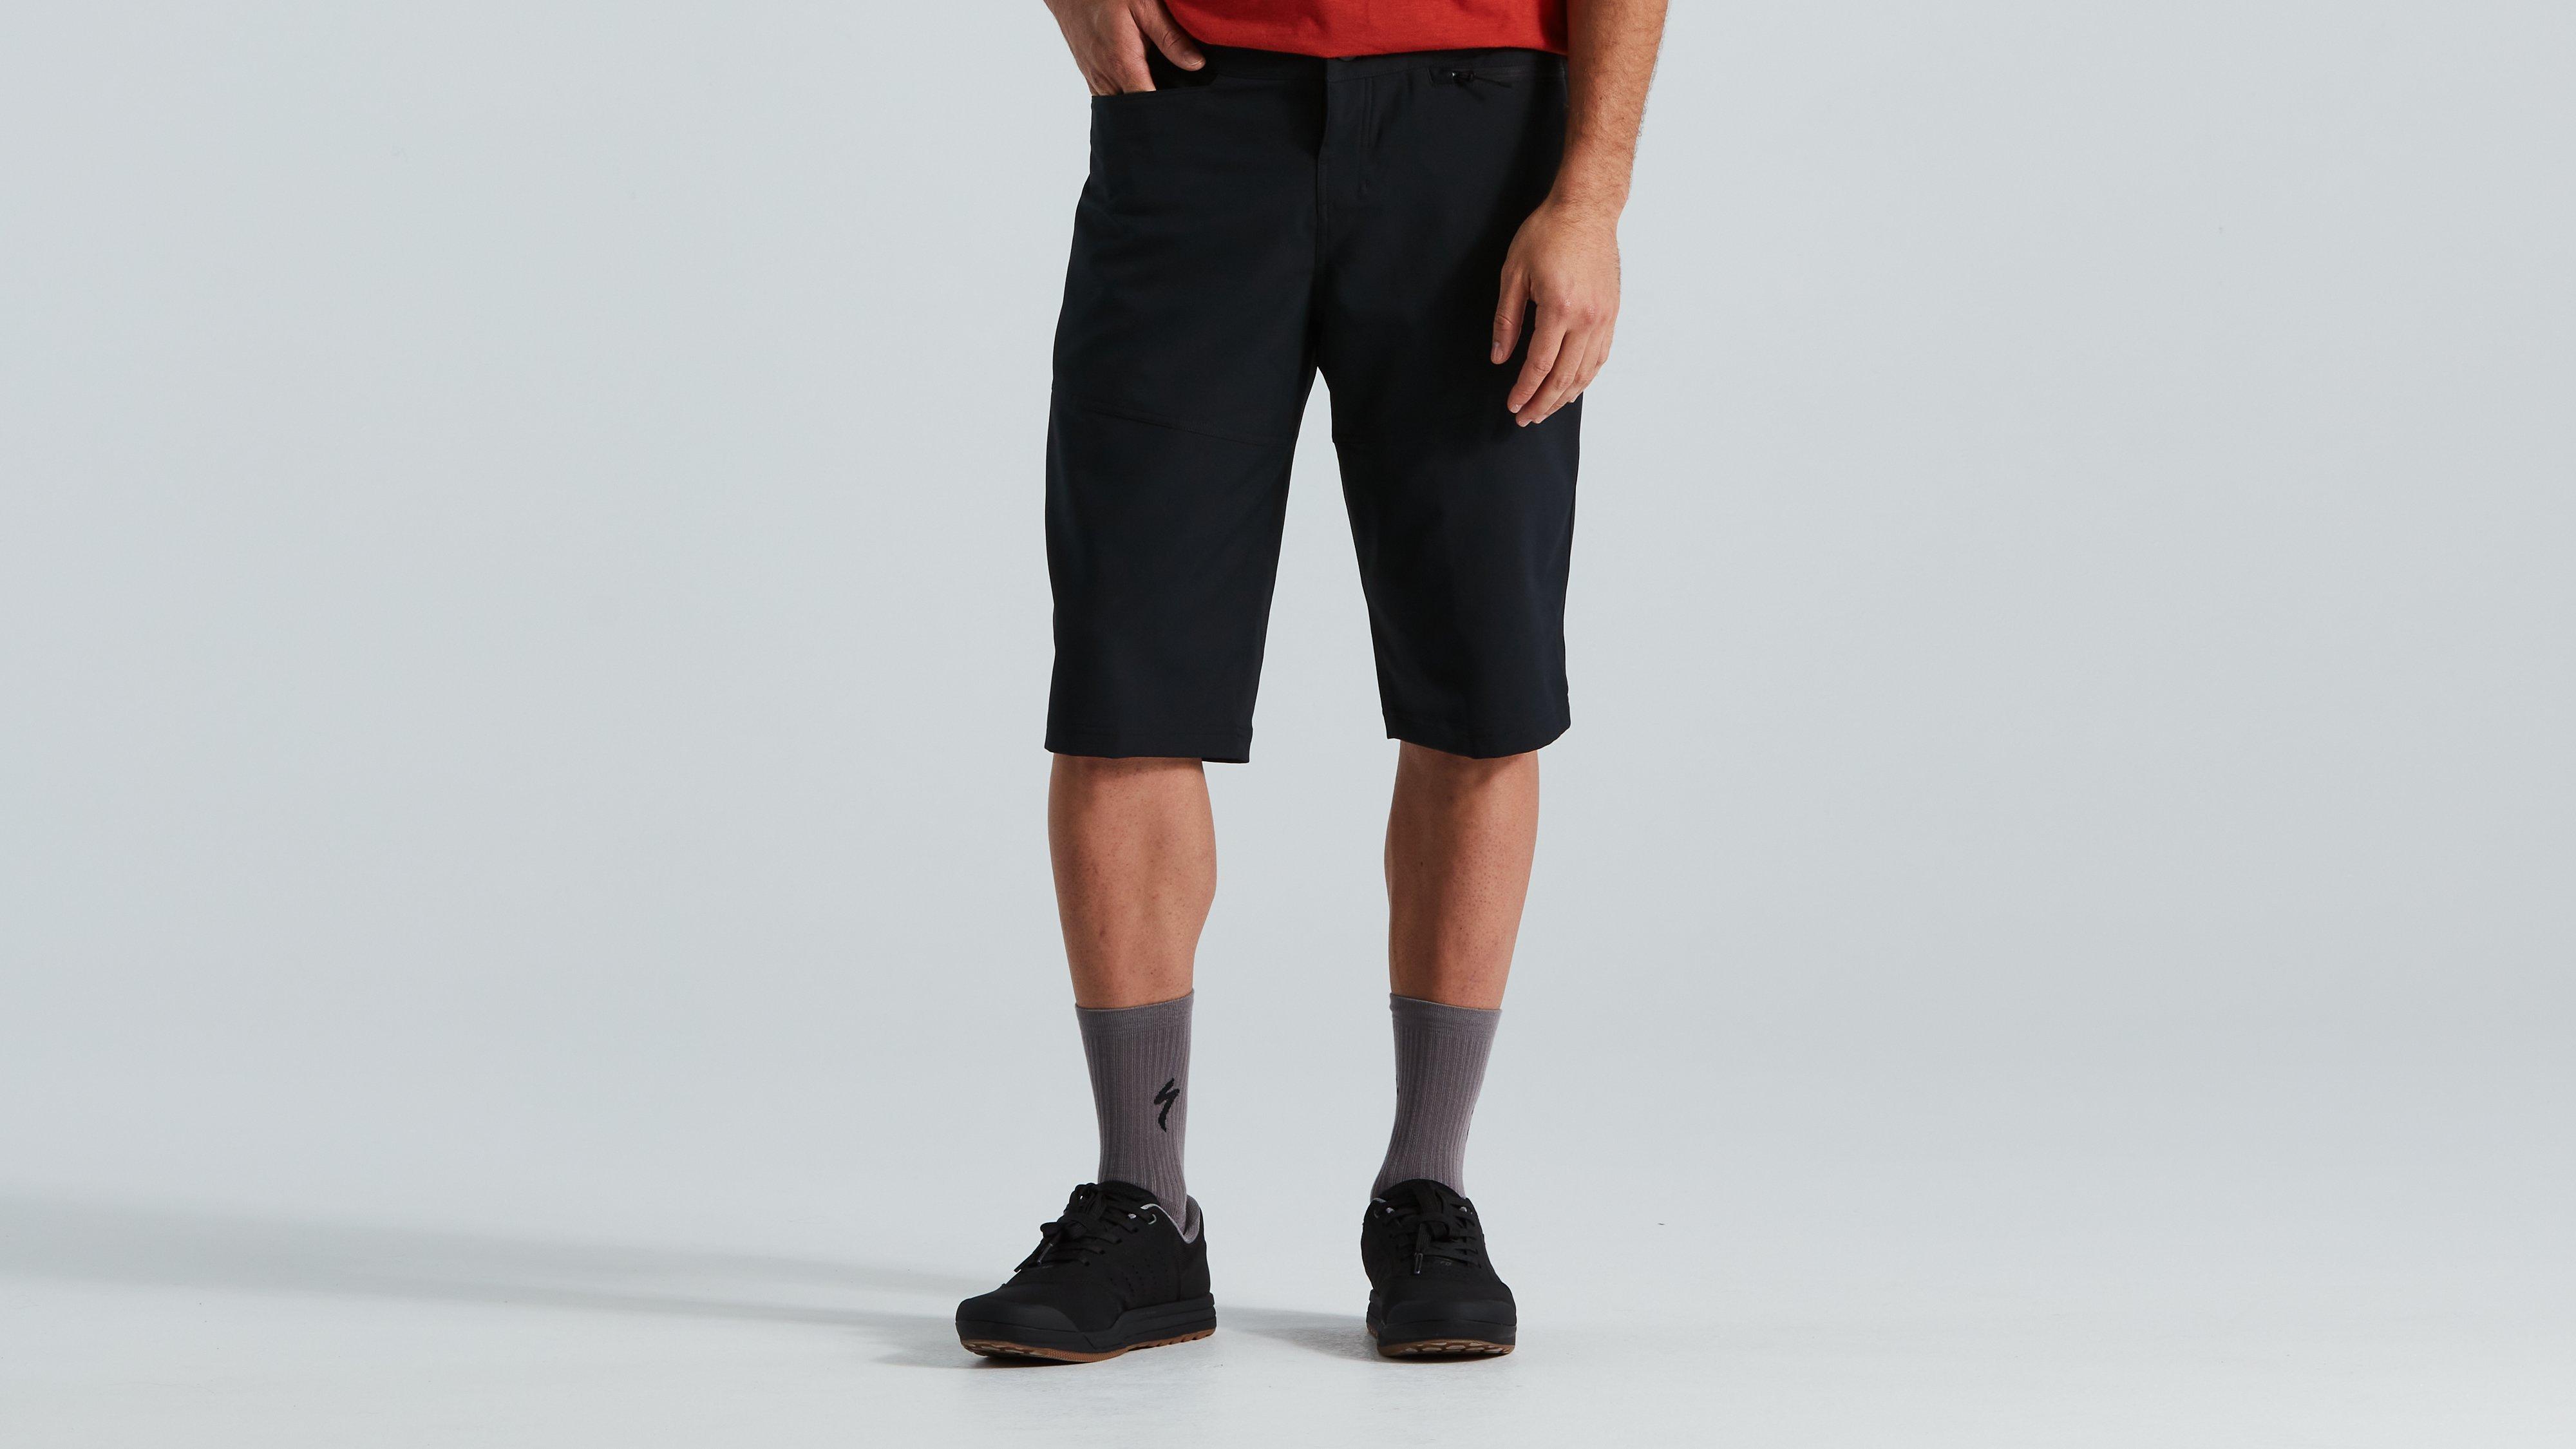 Men's Trail Shorts with Liner | Specialized.com